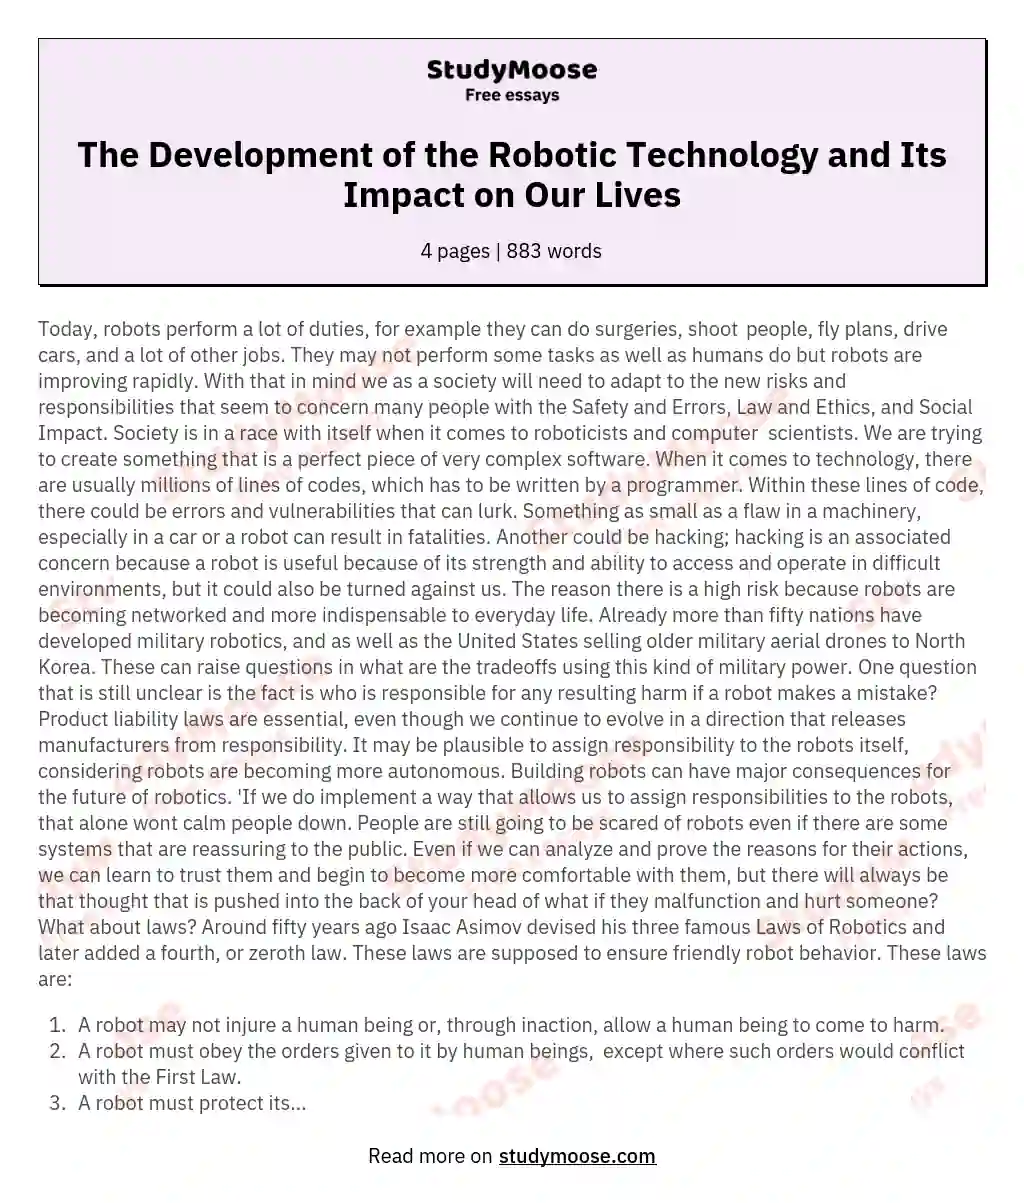 The Development of the Robotic Technology and Its Impact on Our Lives essay